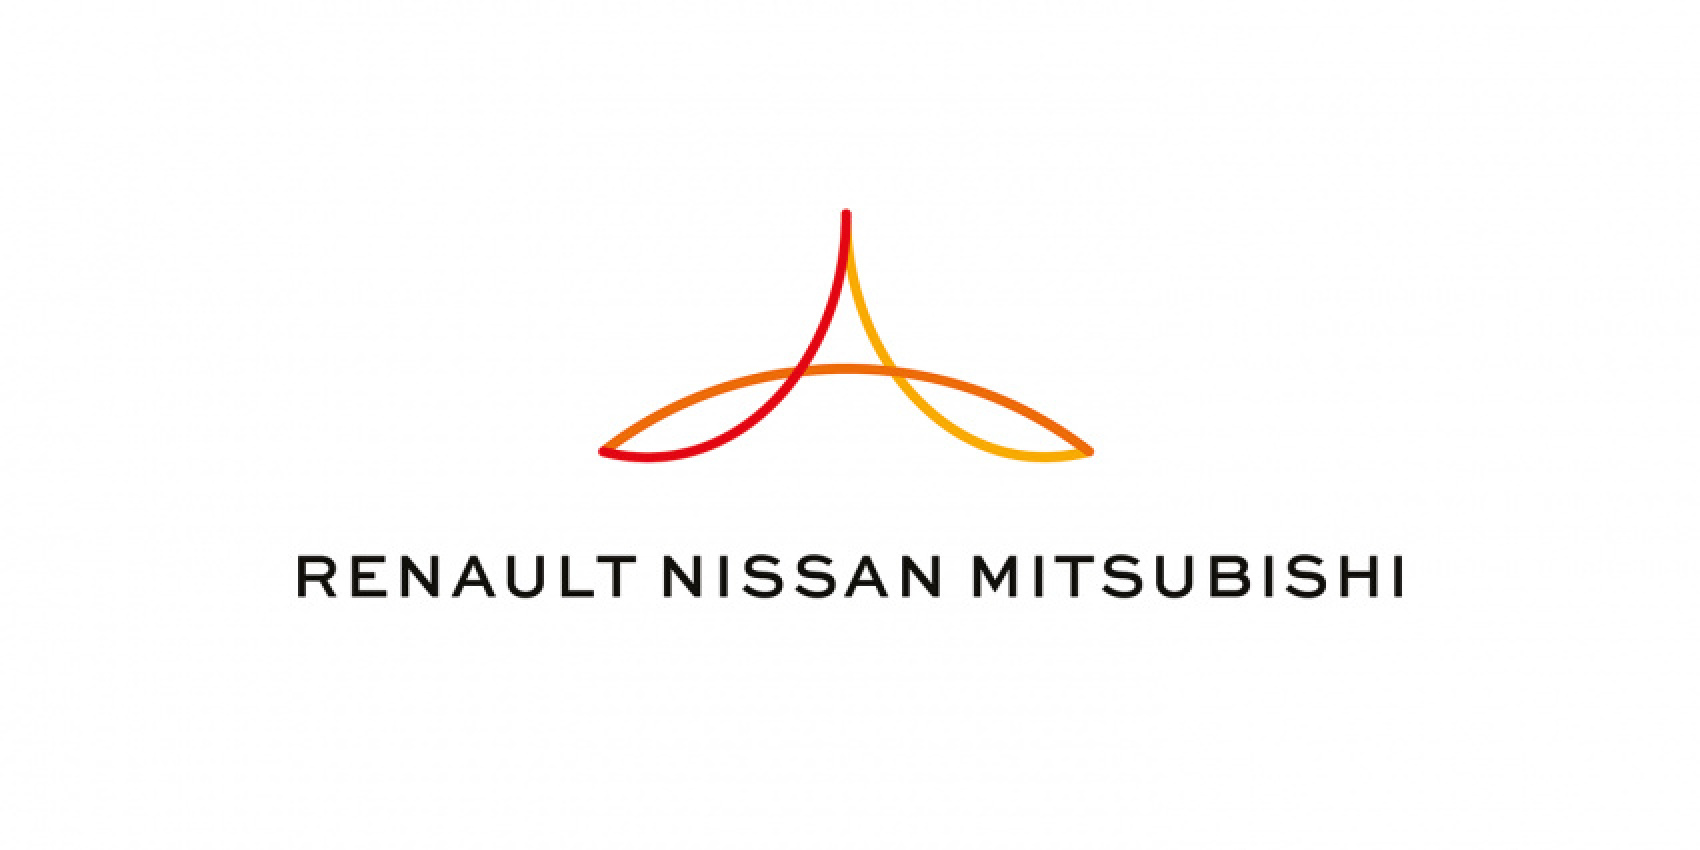 automobile, autos, cars, electric vehicle, mitsubishi, nissan, renault, batteries, micra, renault-nissan-mitsubishi, renault-nissan-mitsubishi plans billion-euro investment in e-mobility